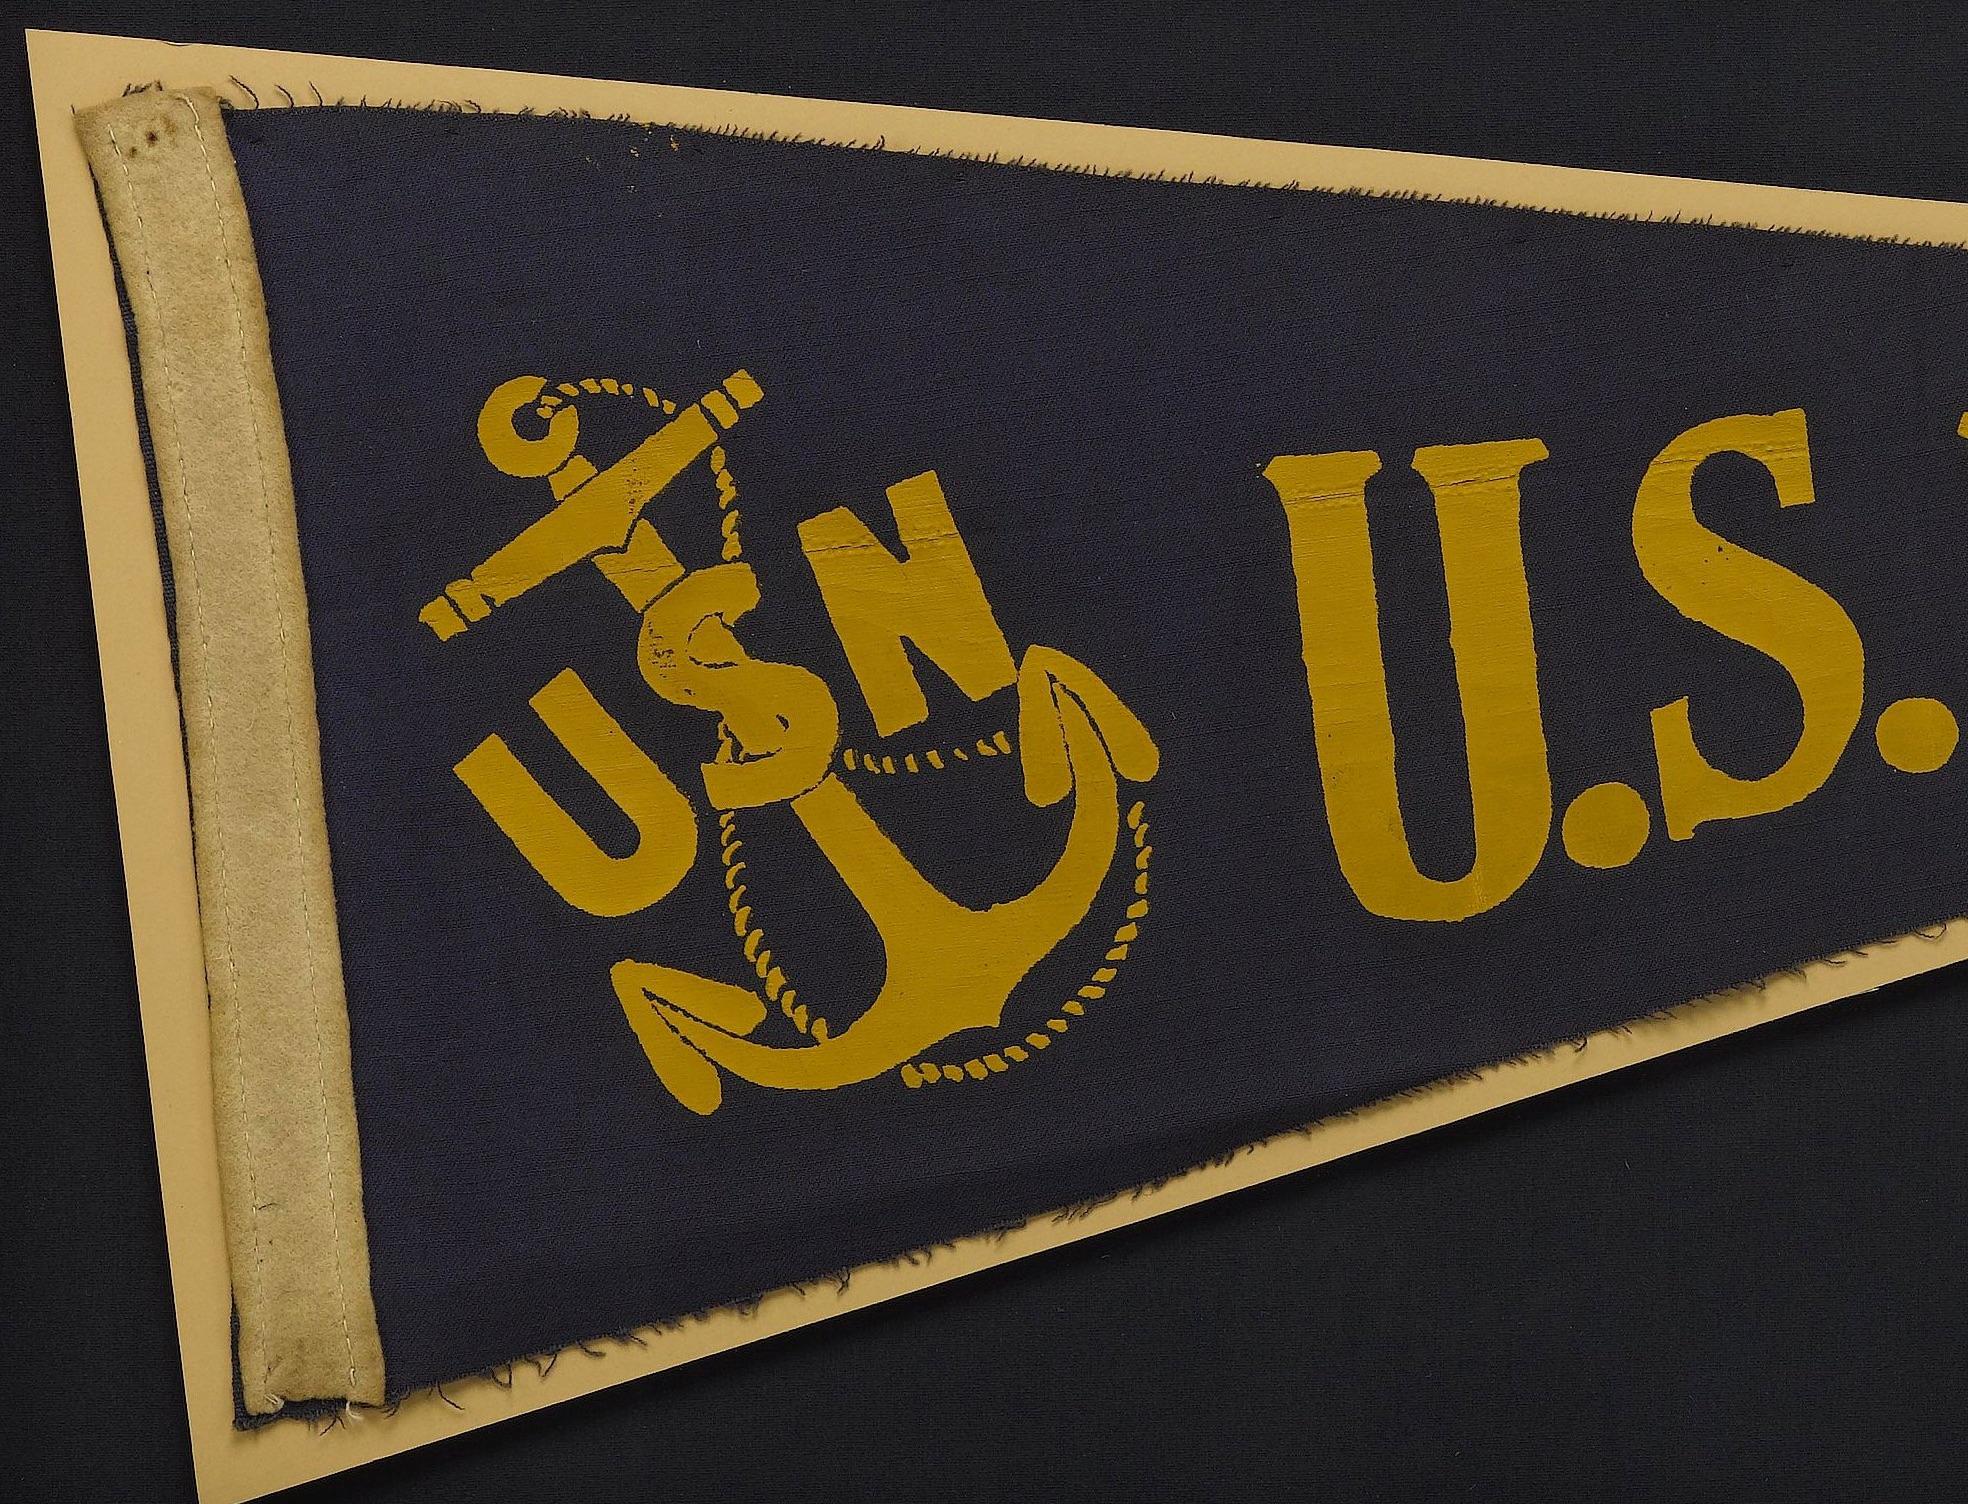 Presented is a vintage U.S. Navy felt pennant, from the early 1940s. This WWII era pennant is constructed of dark blue felt with yellow printed lettering. The pennant has a white felt headband, which is sewn on with a running stitch. The pennant